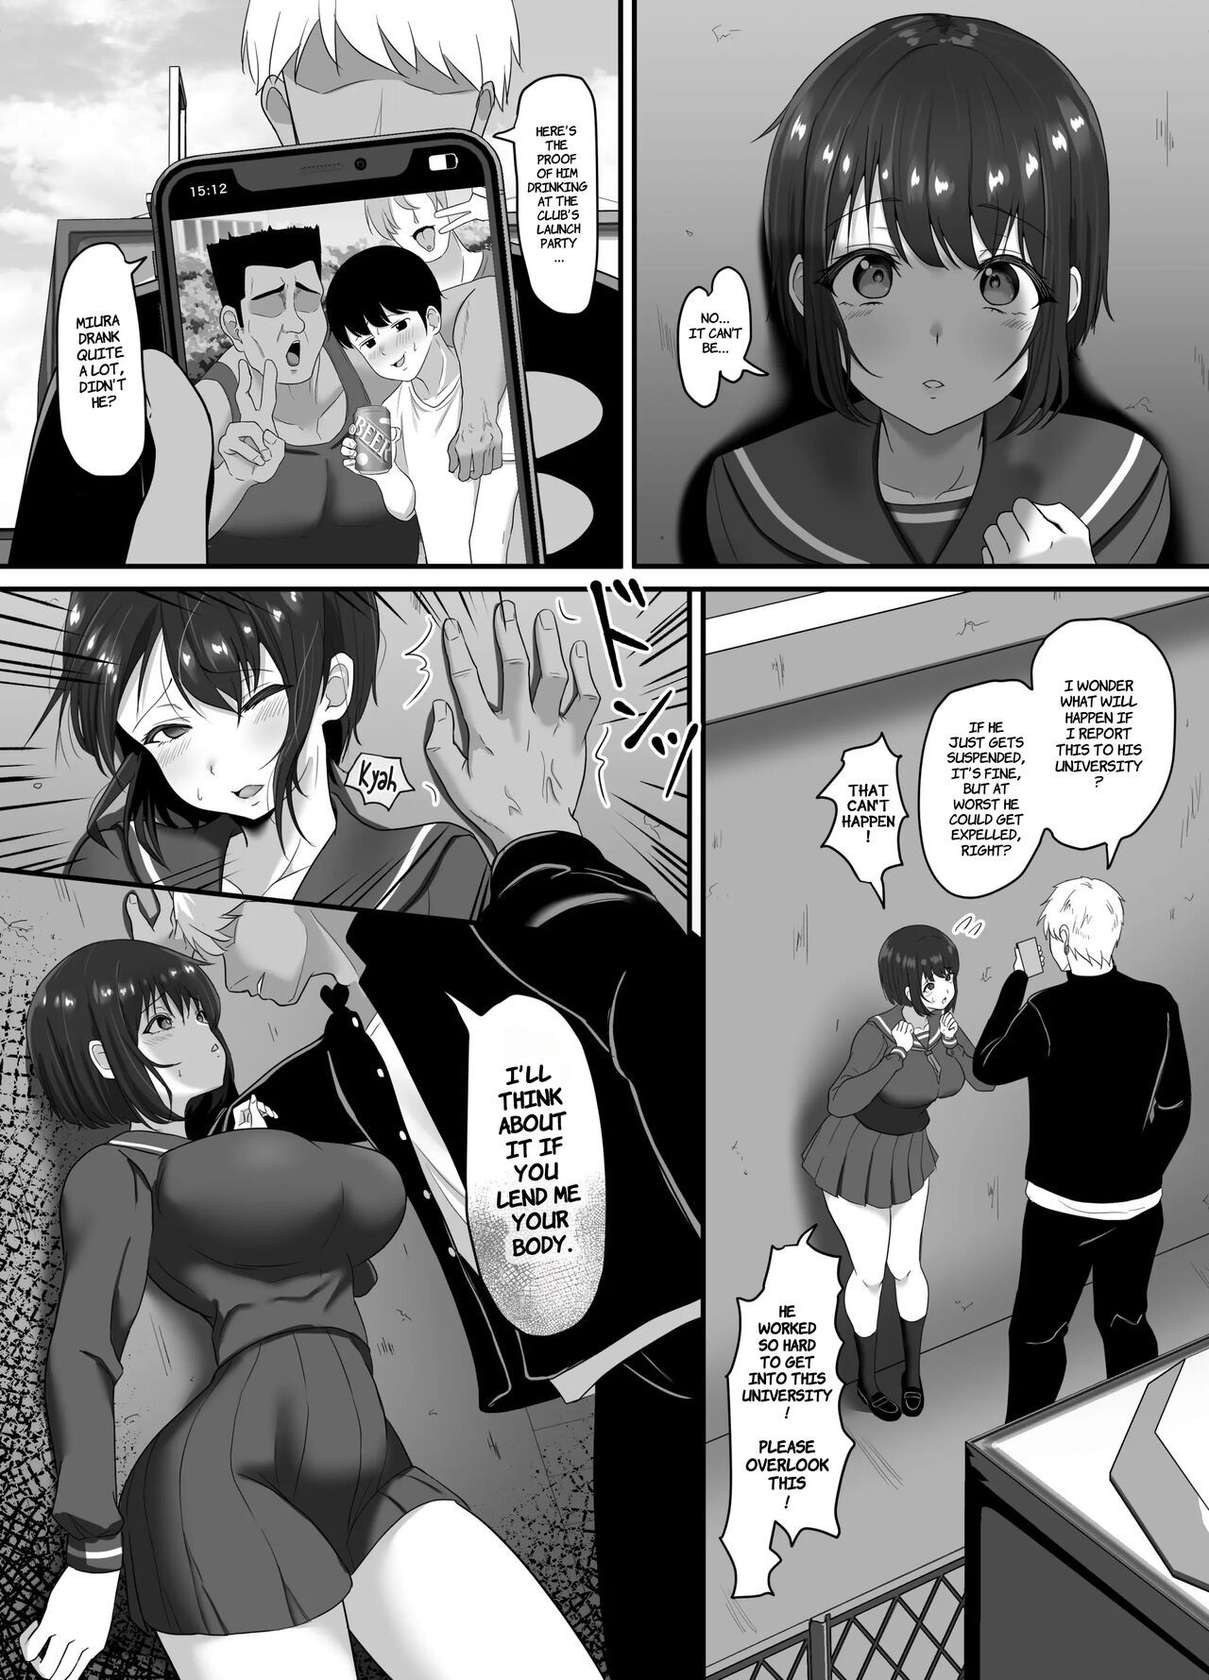 [Sora Paprika] Corrupted Innocence - A story about a long-distance, pure and innocent girlfriend being defiled by a playboy. [English] [Comoop]